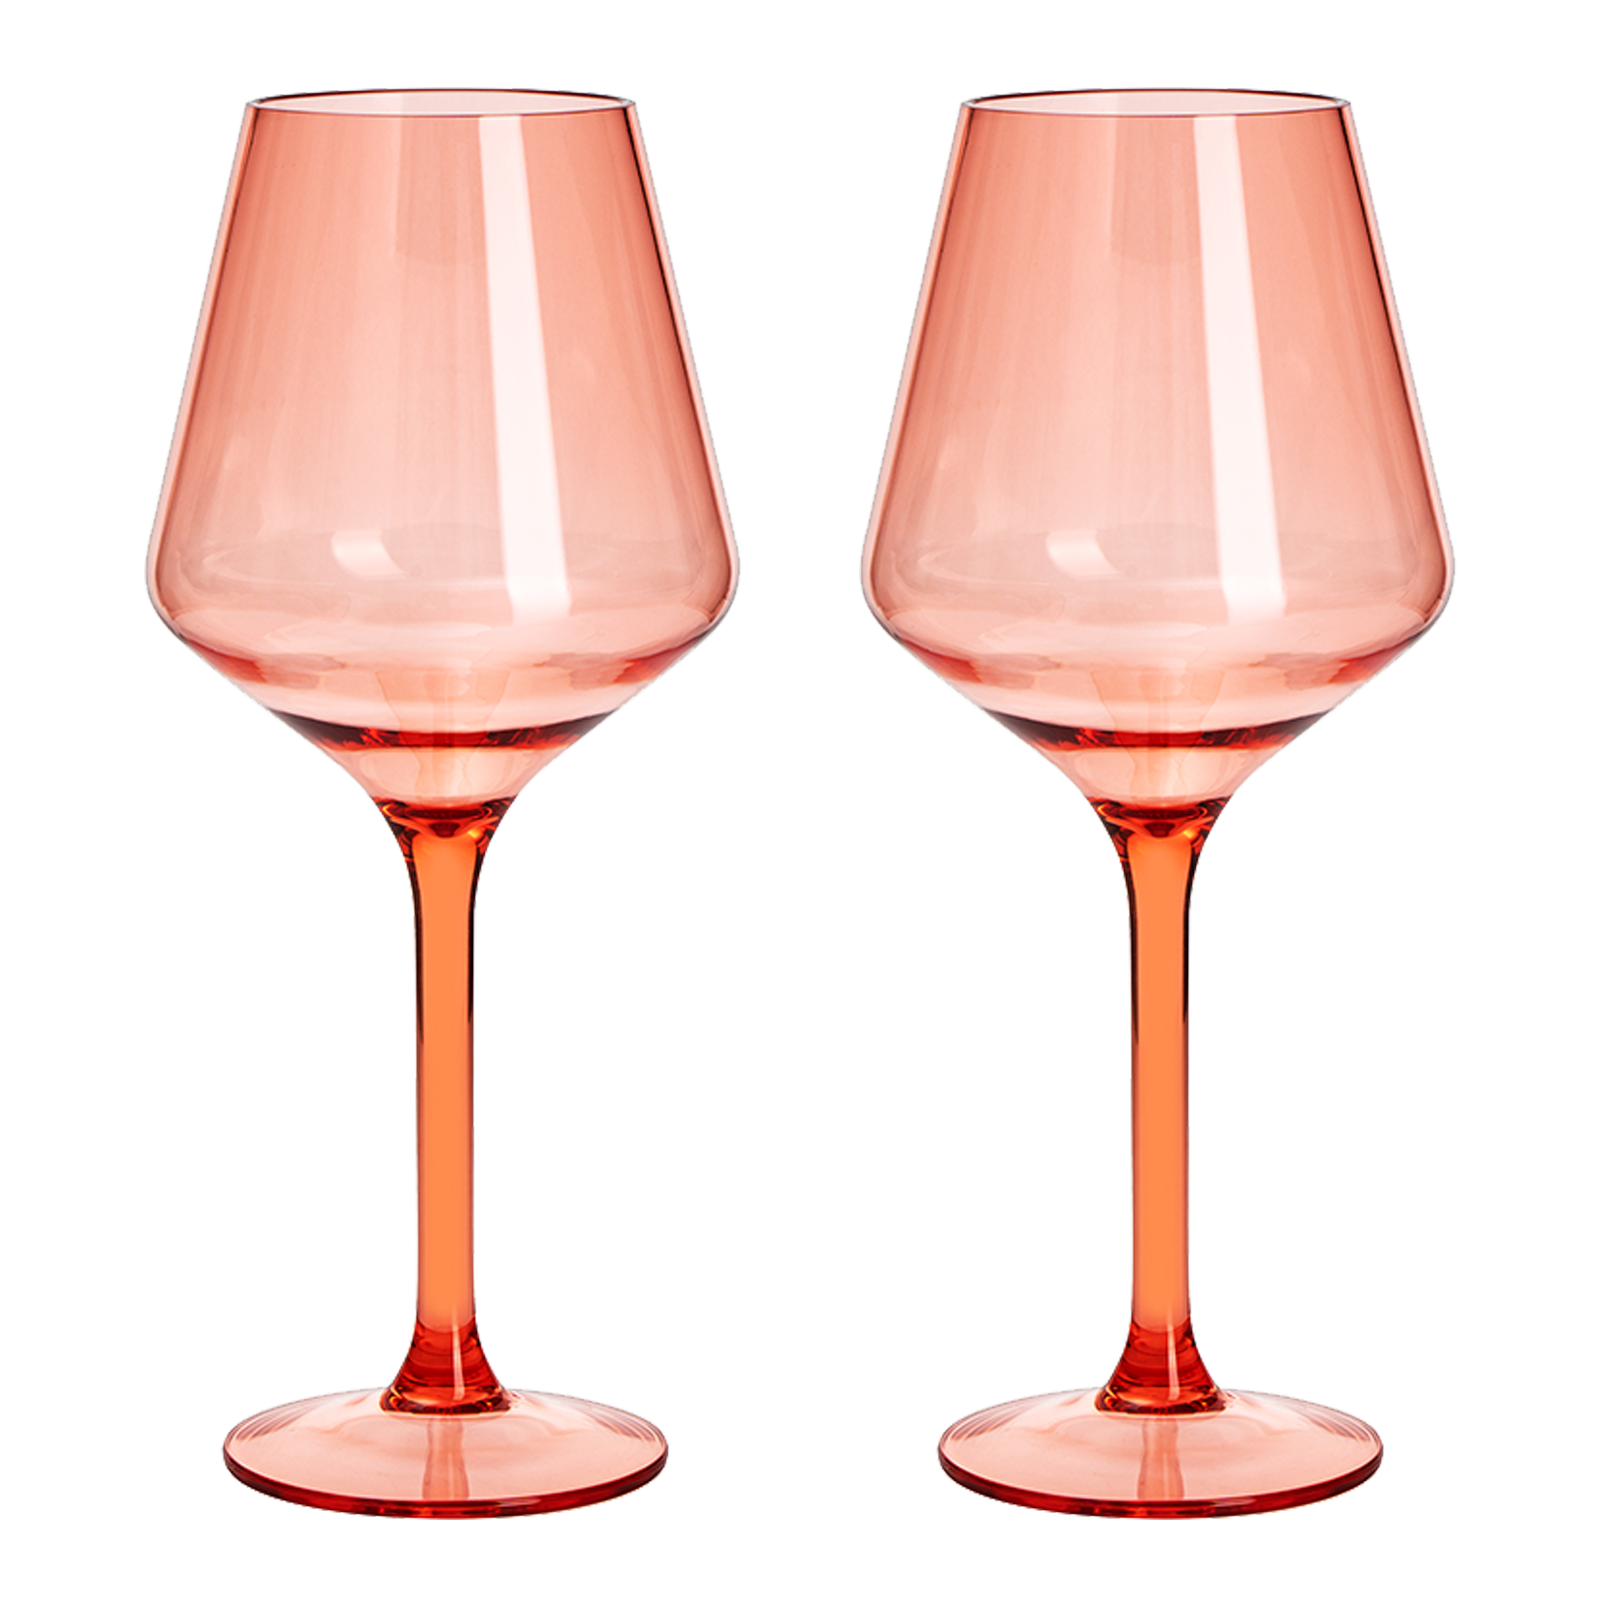 Floating Wine Glasses for Pool with Charms Tags, Shatterproof Poolside Wine  Glasses, Floating Cup Wi…See more Floating Wine Glasses for Pool with